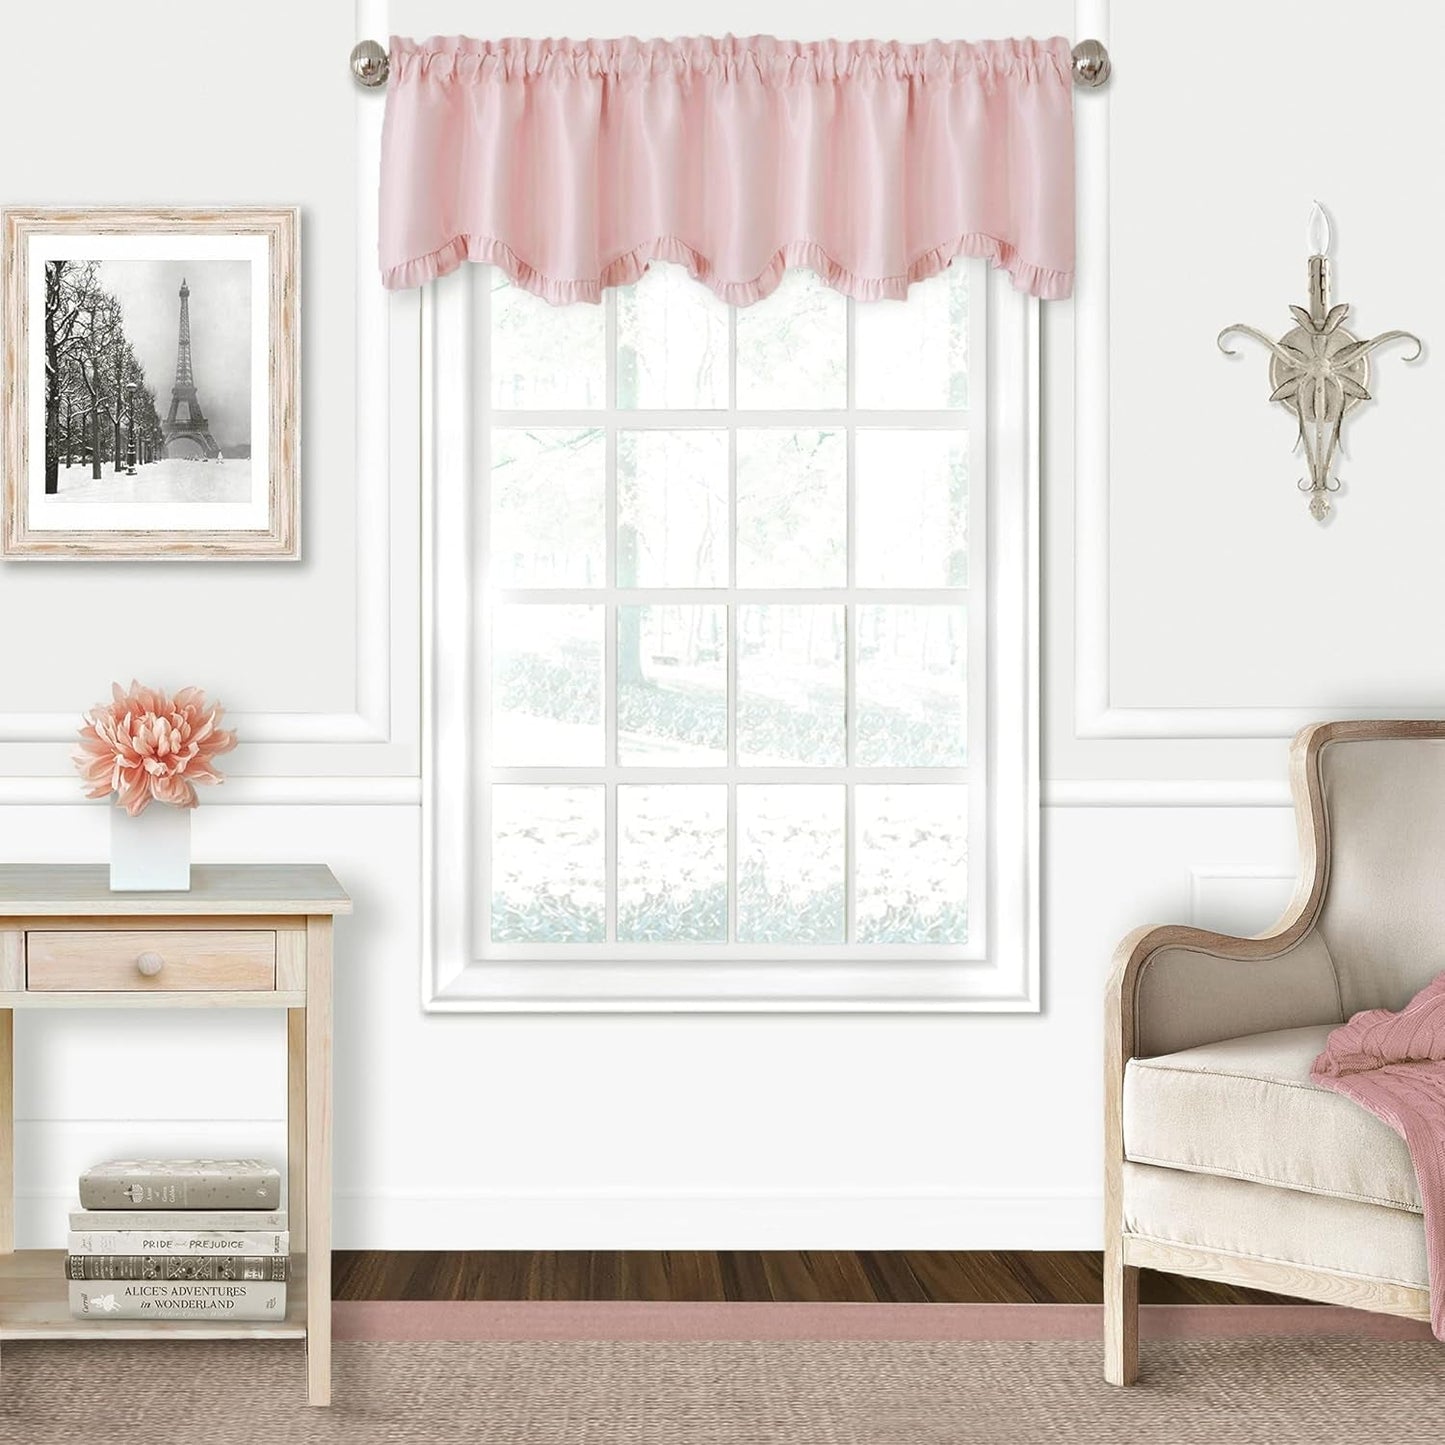 Elrene Home Fashions Adelaide Nursery and Kids’ Room Ruffled Window Valance, 15 Inches X 52 Inches, Pearl Gray